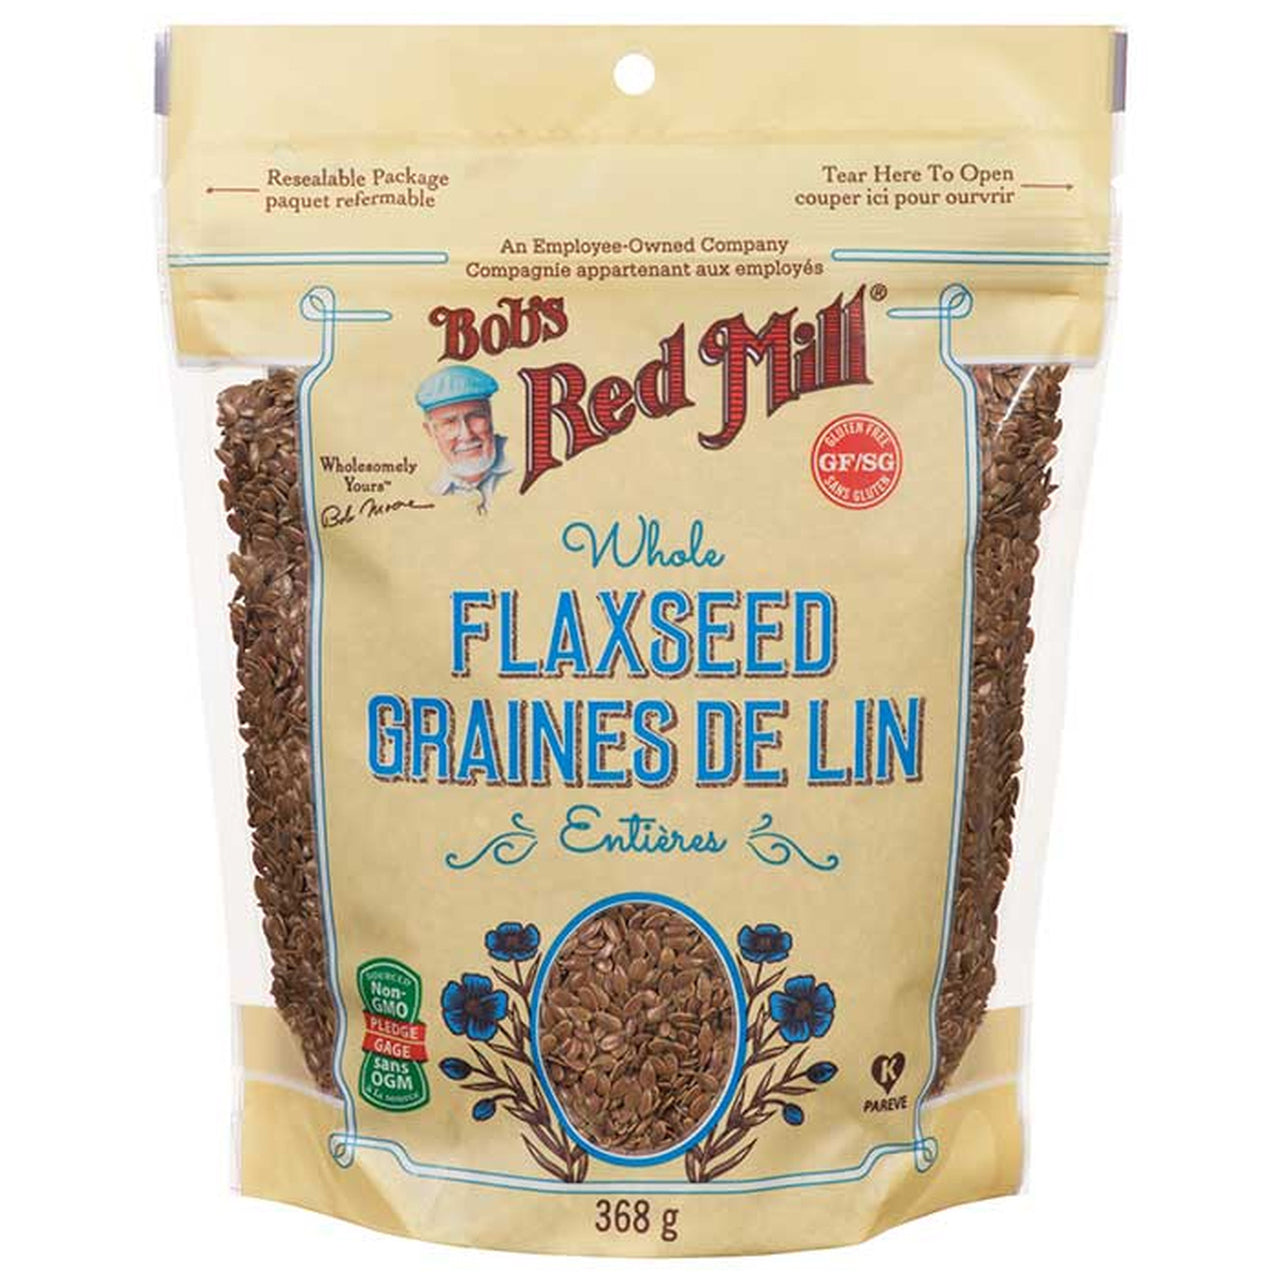 Bob's Red Mill Whole Flaxseed